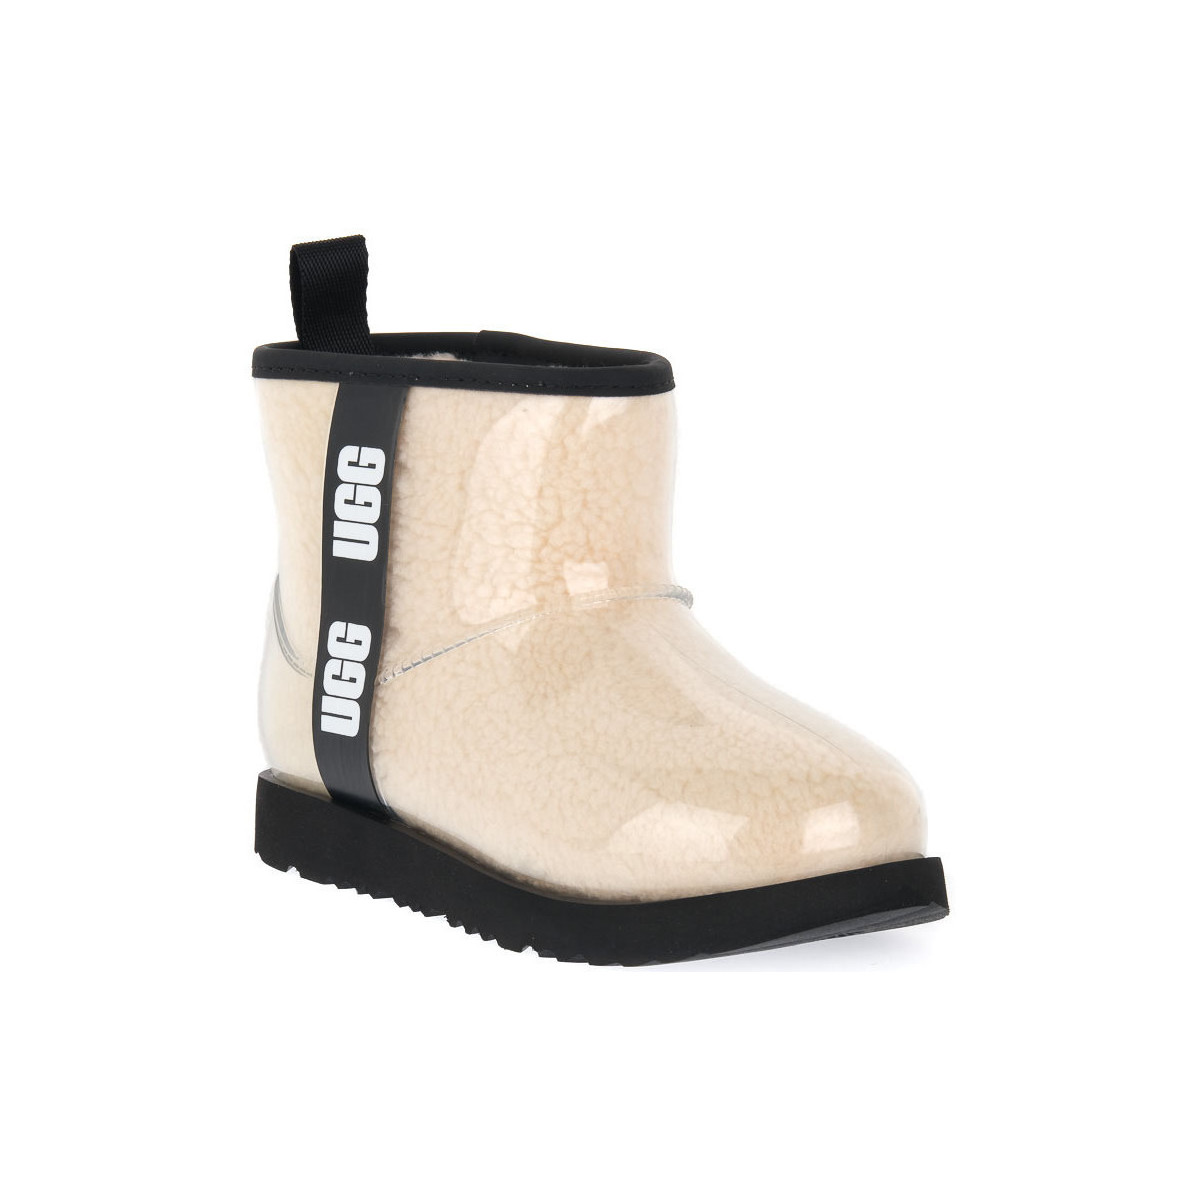 Zapatos Mujer Botas UGG CLASSIC CLEAR MINI NATURAL Beige